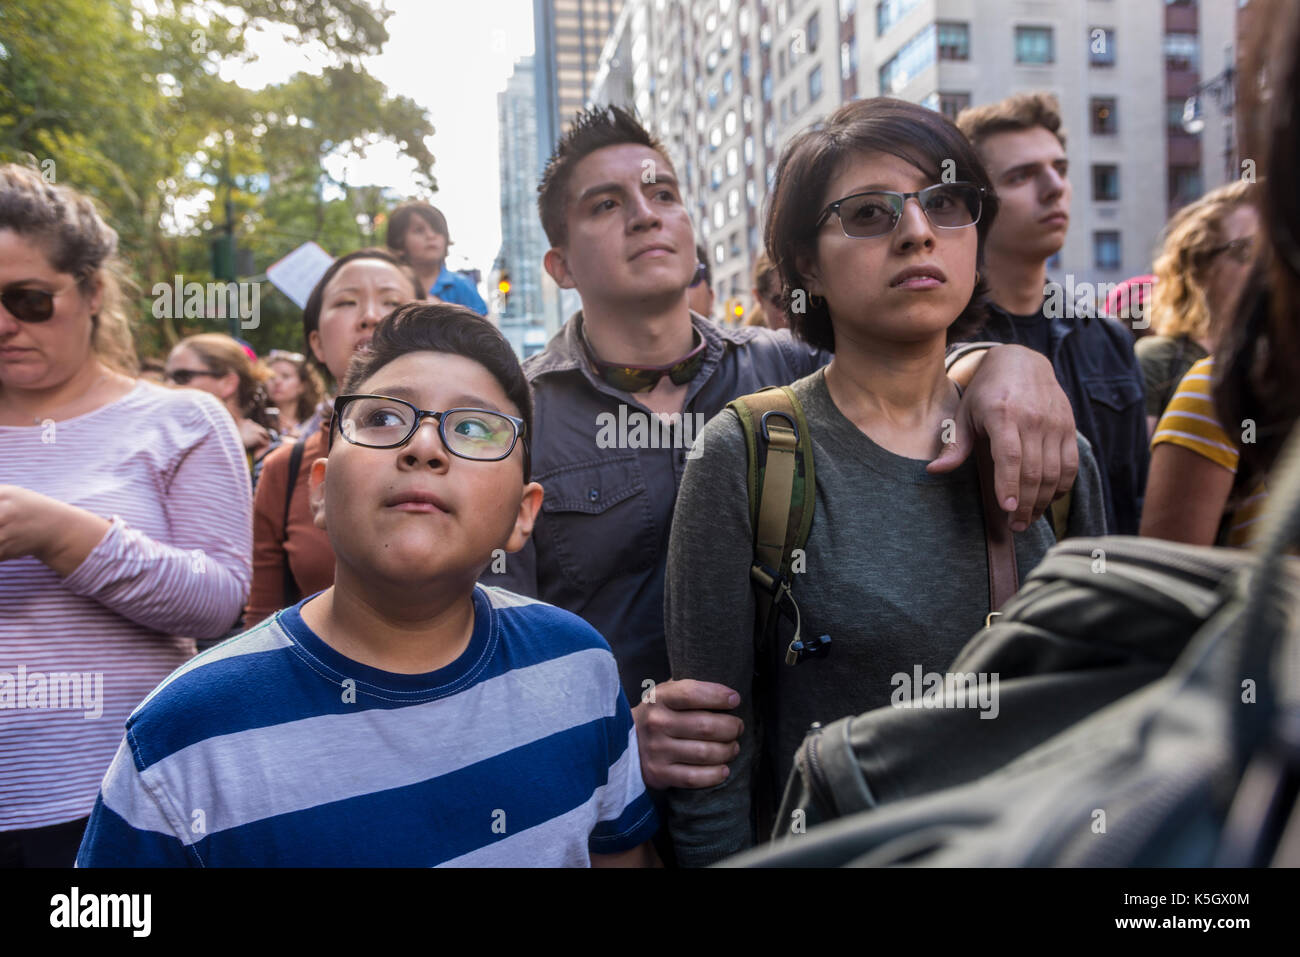 New York, NY 9 September 2017 - Several thousand 'Dreamers, ' the children of undocumented immigrants, and immigration activists gathered outside Trump Hotel and Towers in Columbus Circle, to speak out against an end to DACA (Deferred Action for Childhood Arrivals) after trump's attempts to dismantled. CREDIT: ©Stacy Walsh Rosenstock/Alamy Stock Photo